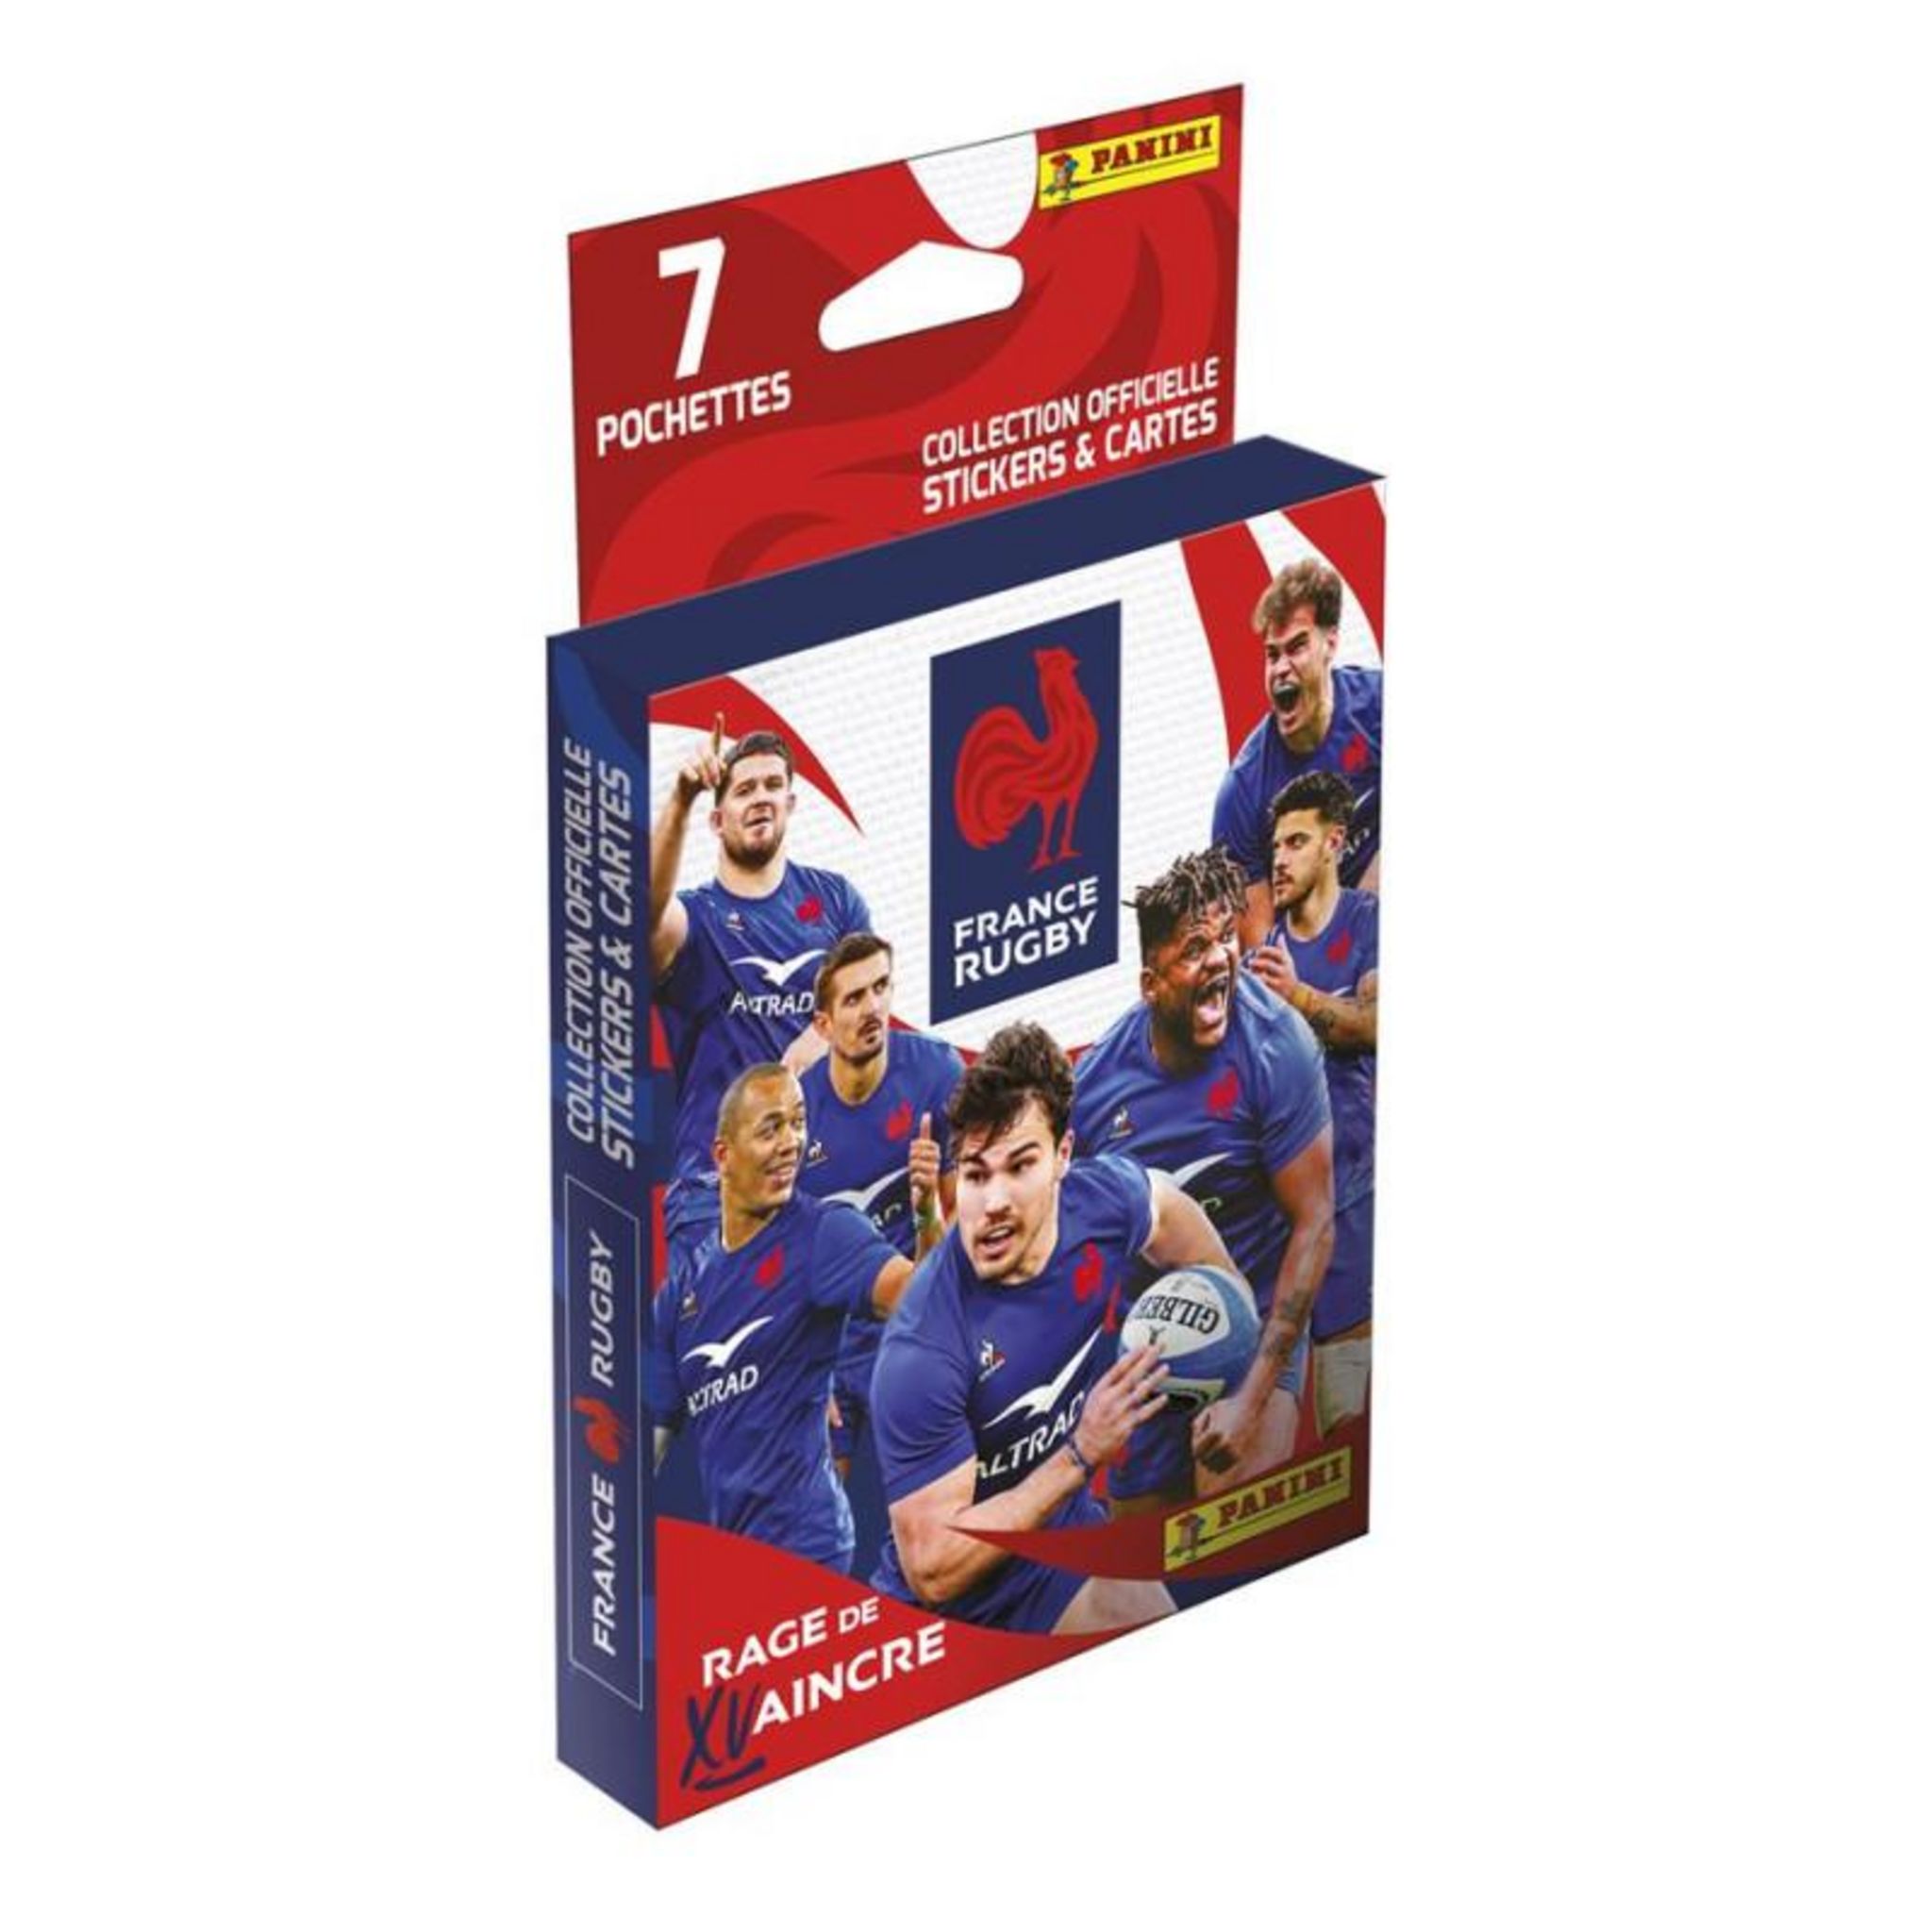 Panini Carte à collectionner Panini Rugby RUGBY EDF Blister 7 pochettes pas  cher 